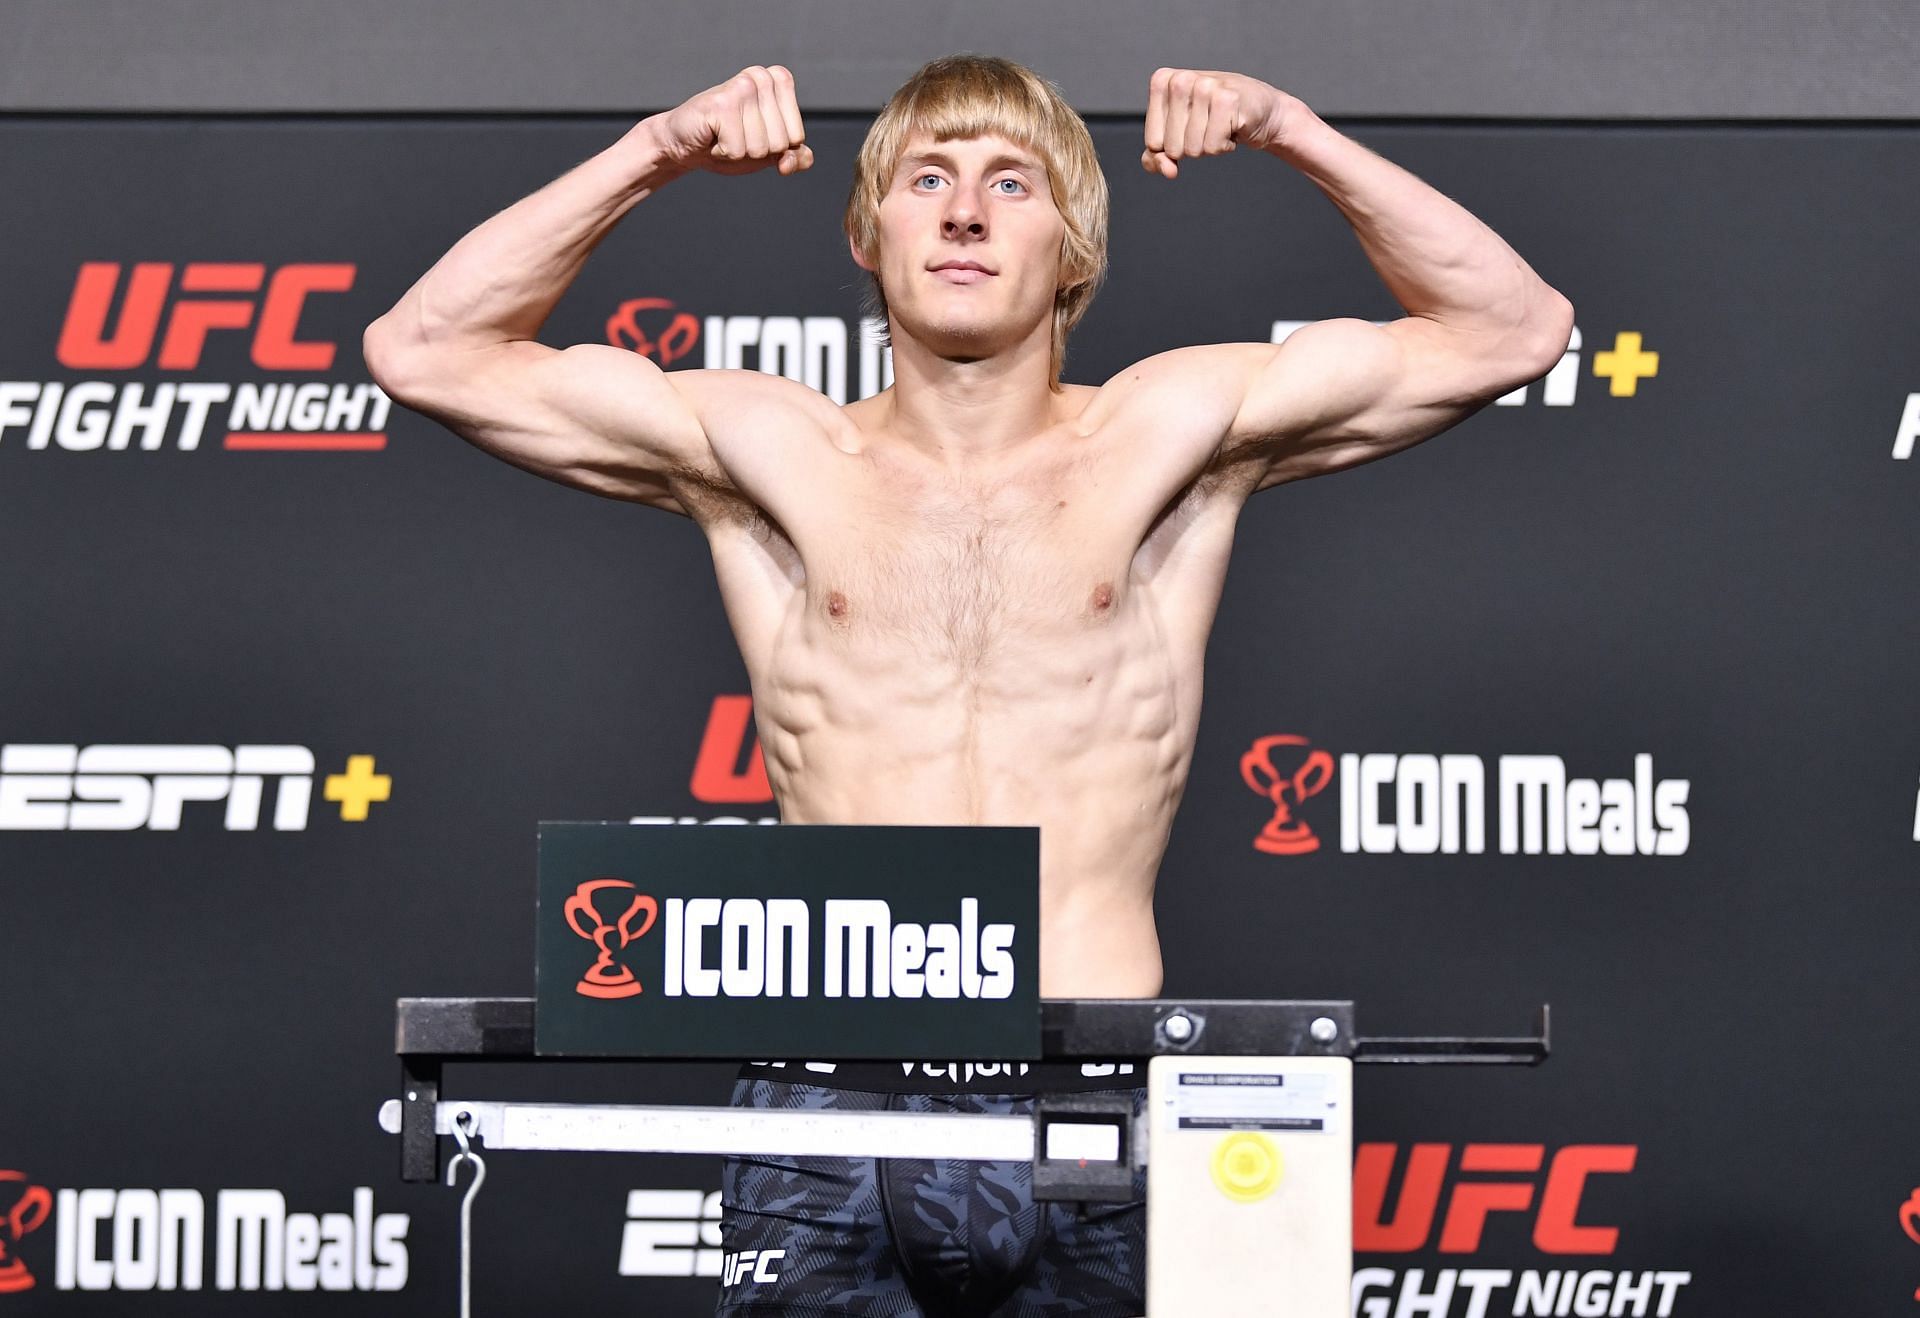 UFC 282 Paddy Pimblett next fight Everything you need to know about Pimbletts UFC 282 opponent